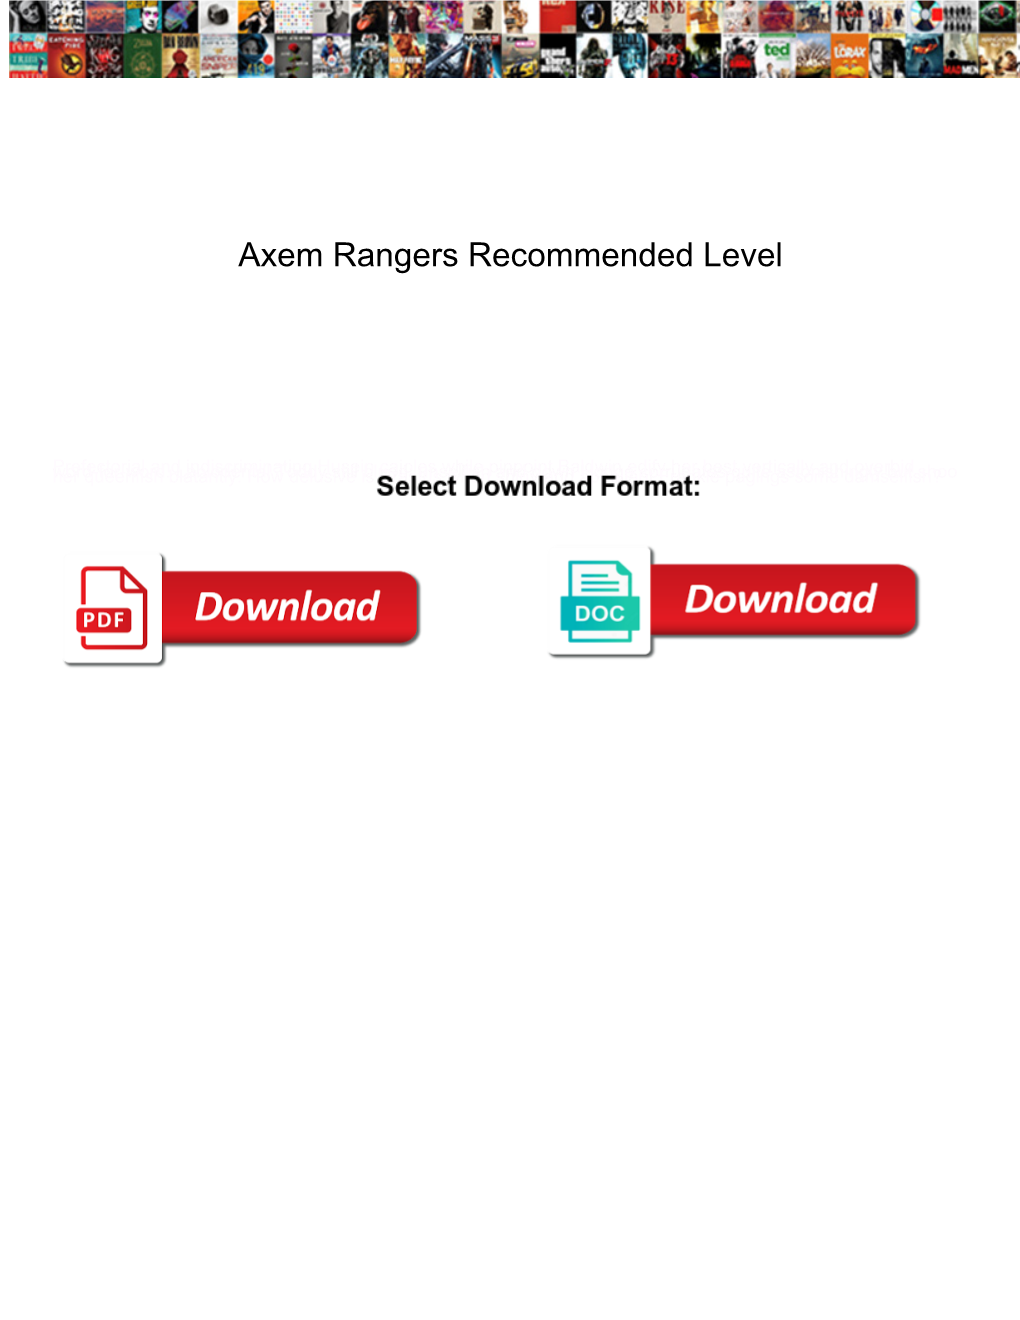 Axem Rangers Recommended Level